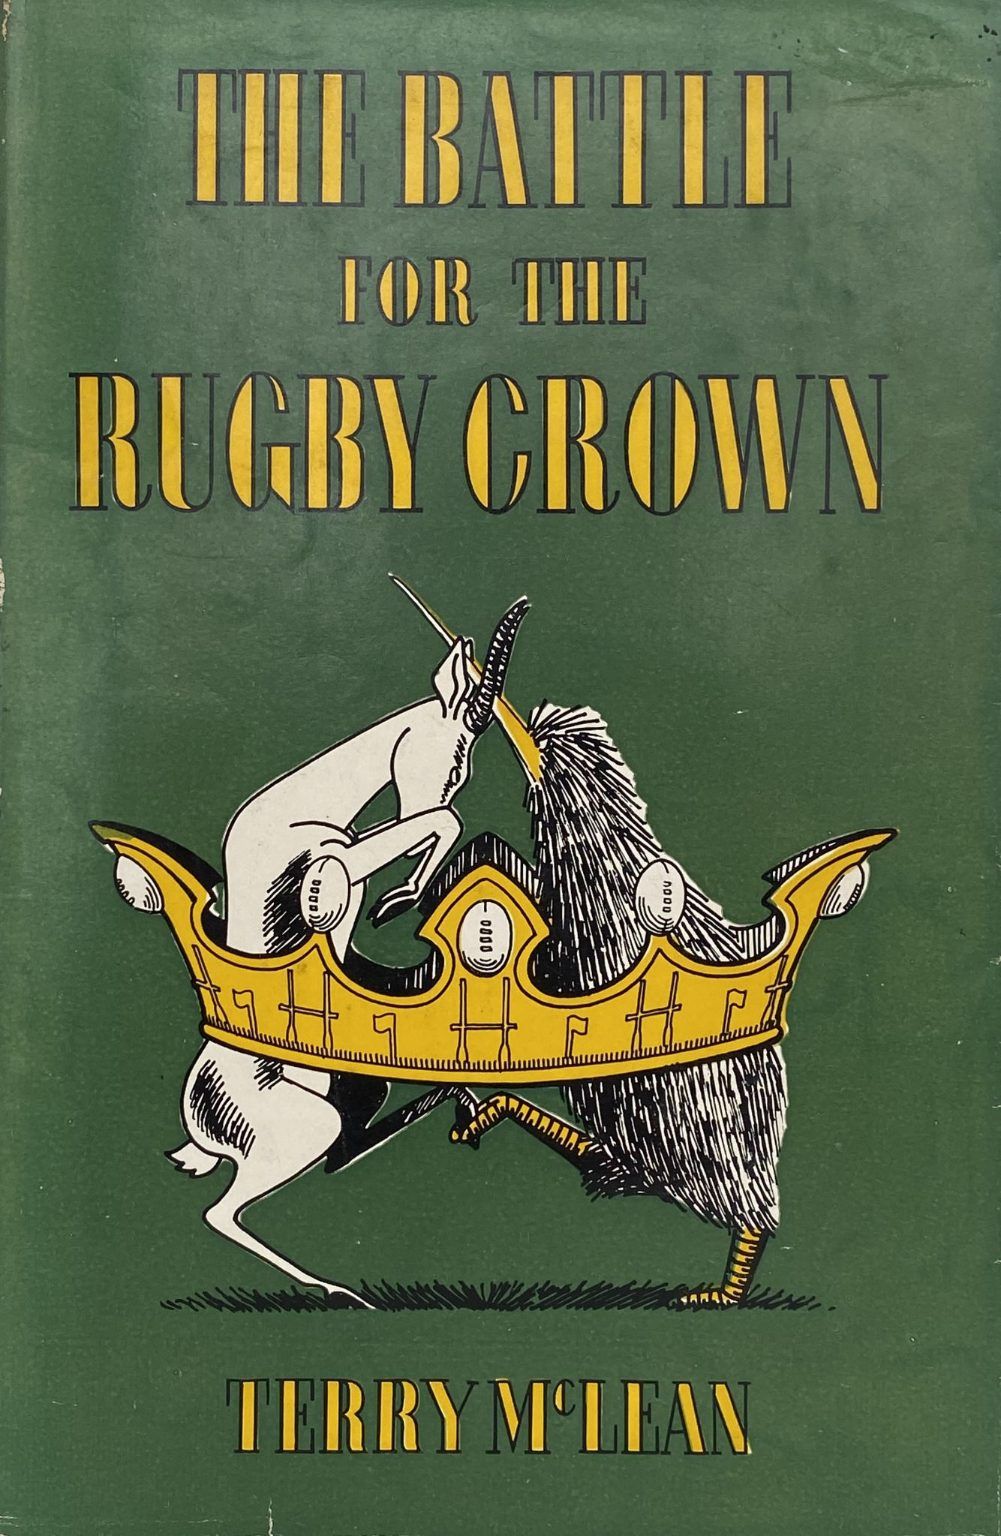 THE BATTLE FOR THE RUGBY CROWN